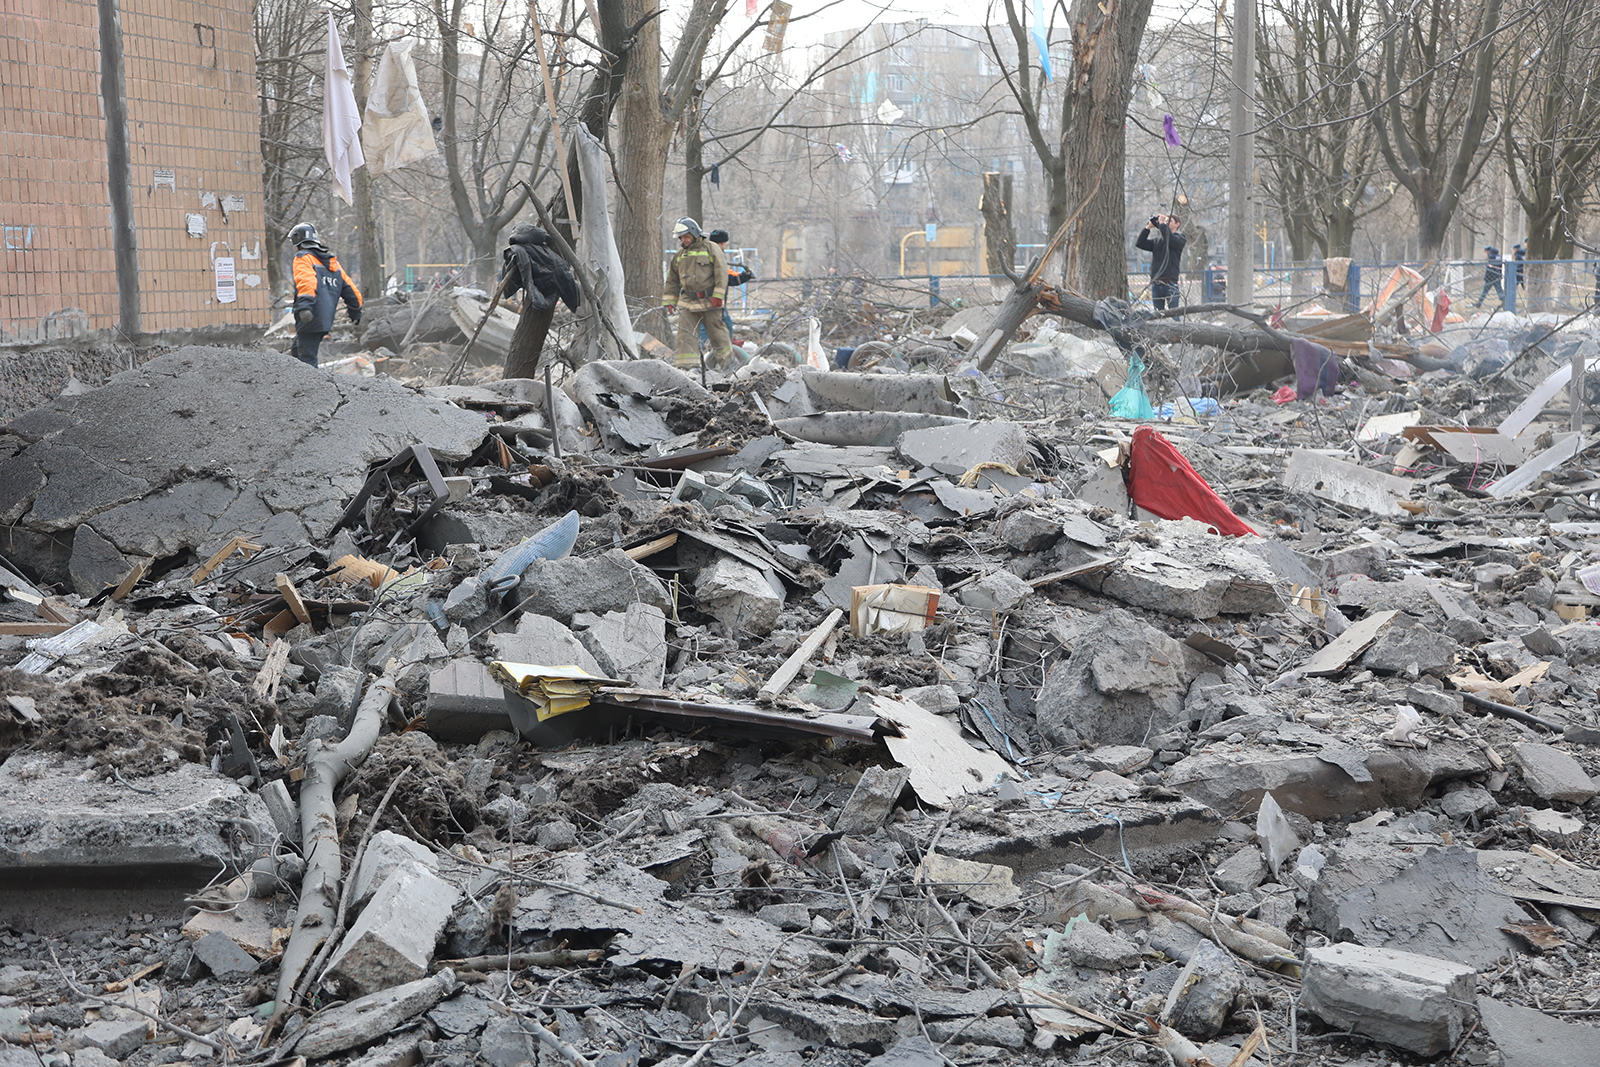 Damage after shelling in the pro-Russian separatists-controlled Donetsk, in Ukraine on March 30.